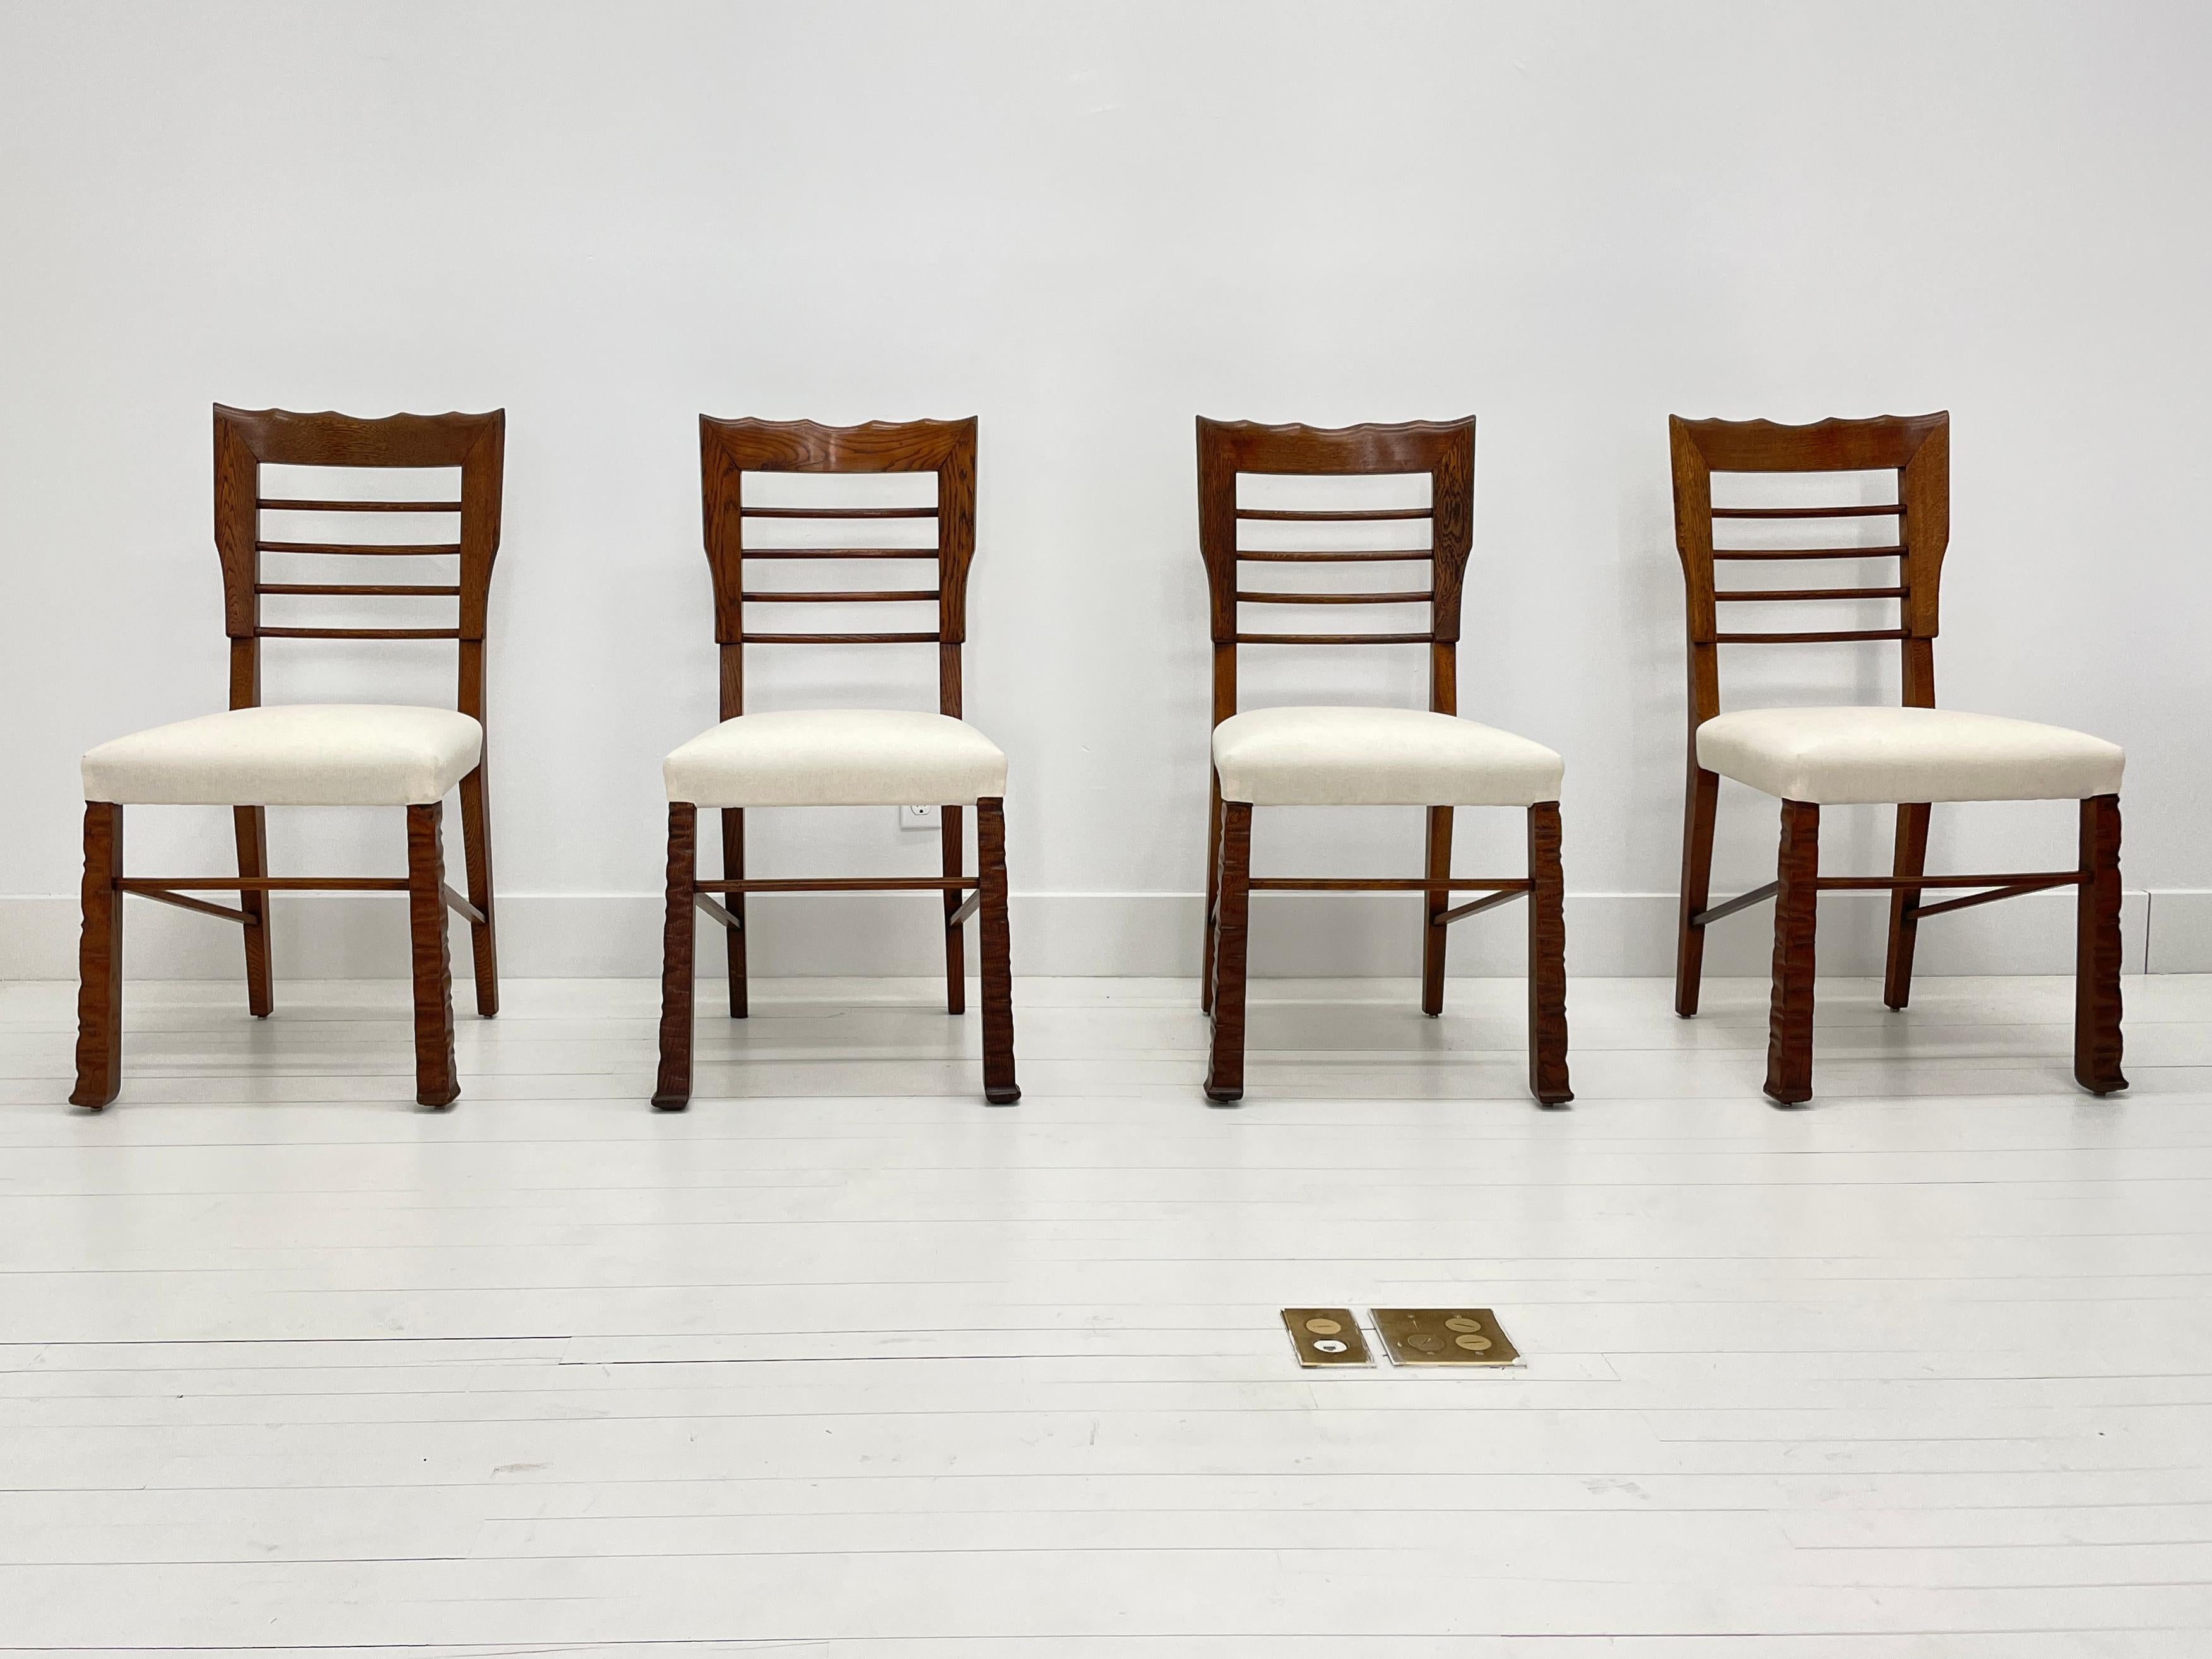 20th Century Rustic Scalloped Edge Dining Chairs, Set of 10, Italy, 1940's For Sale